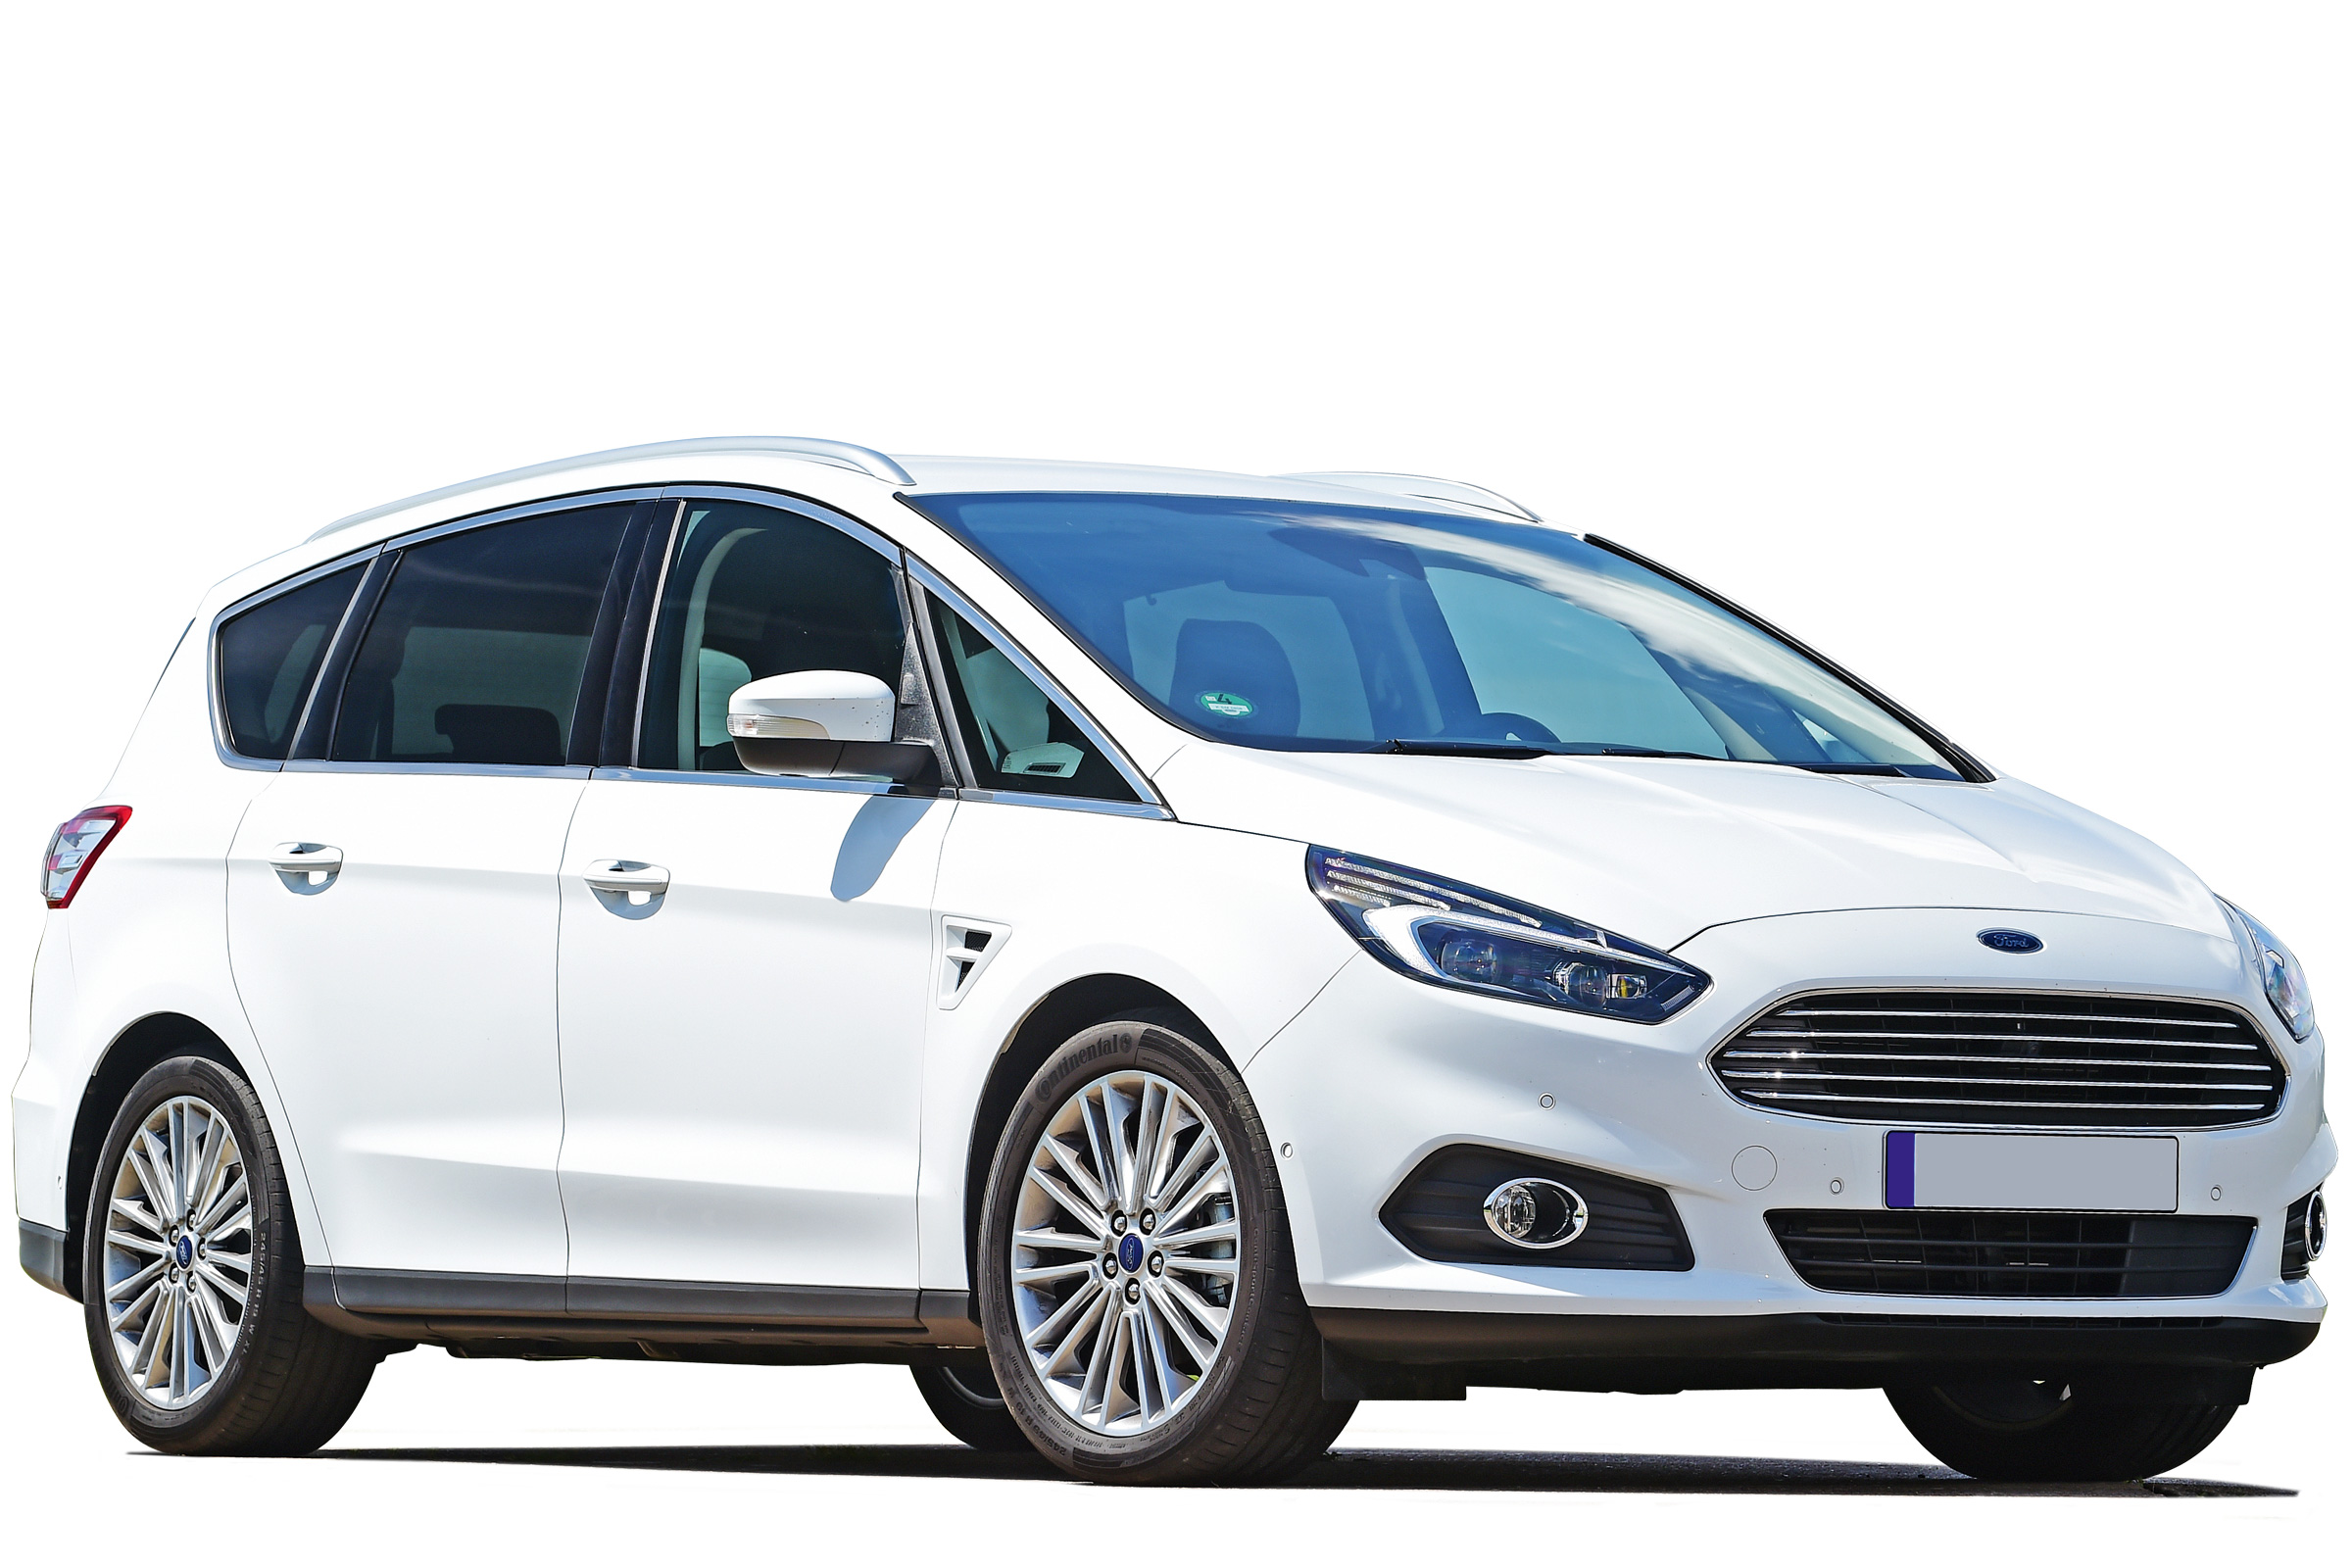 Ford S Max Owner Reviews Mpg Problems Reliability Review Carbuyer